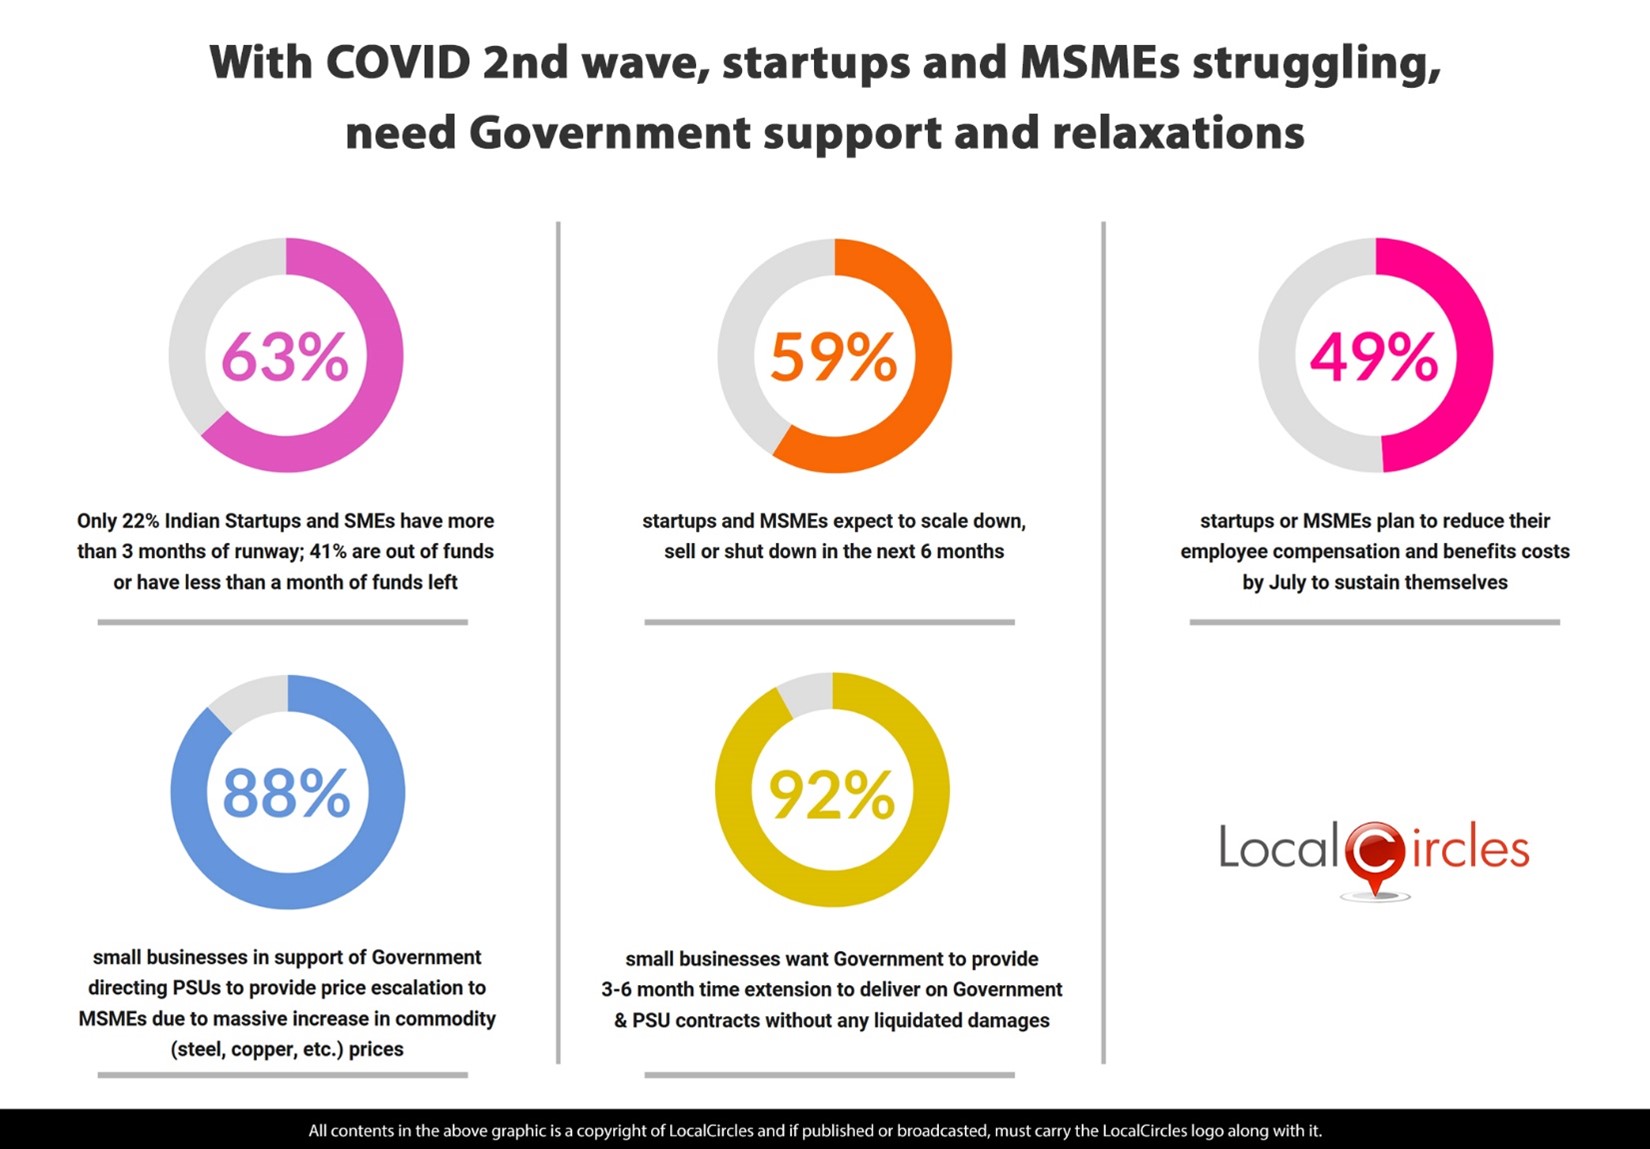 With COVID 2nd wave, startups and MSMEs struggling, need Government support and relaxations